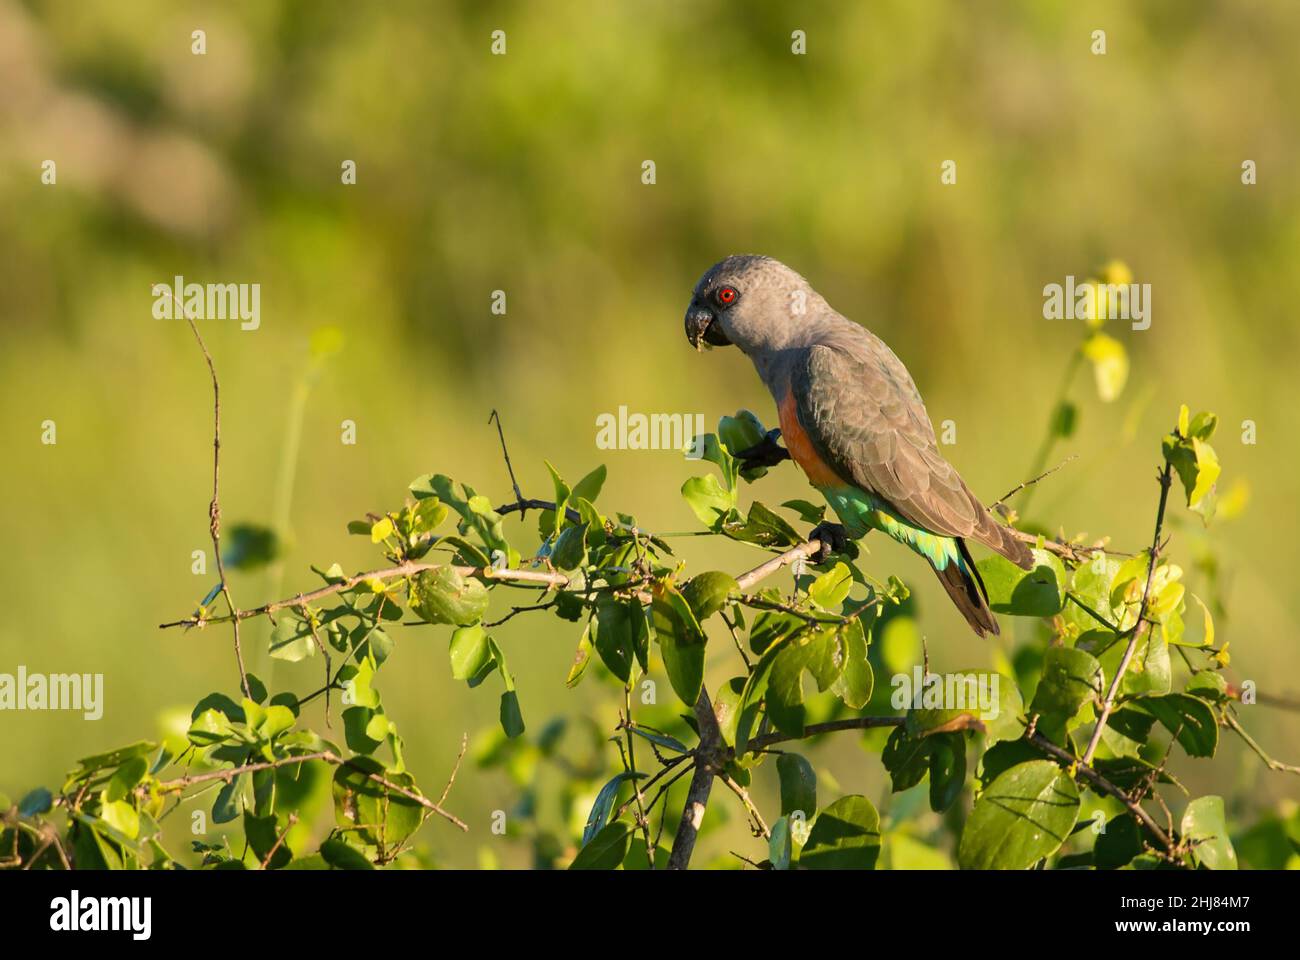 Red-bellied Parrot - Poicephalus rufiventris, small colored parrot from African bushes and savannahs, Taita hills, Kenya. Stock Photo